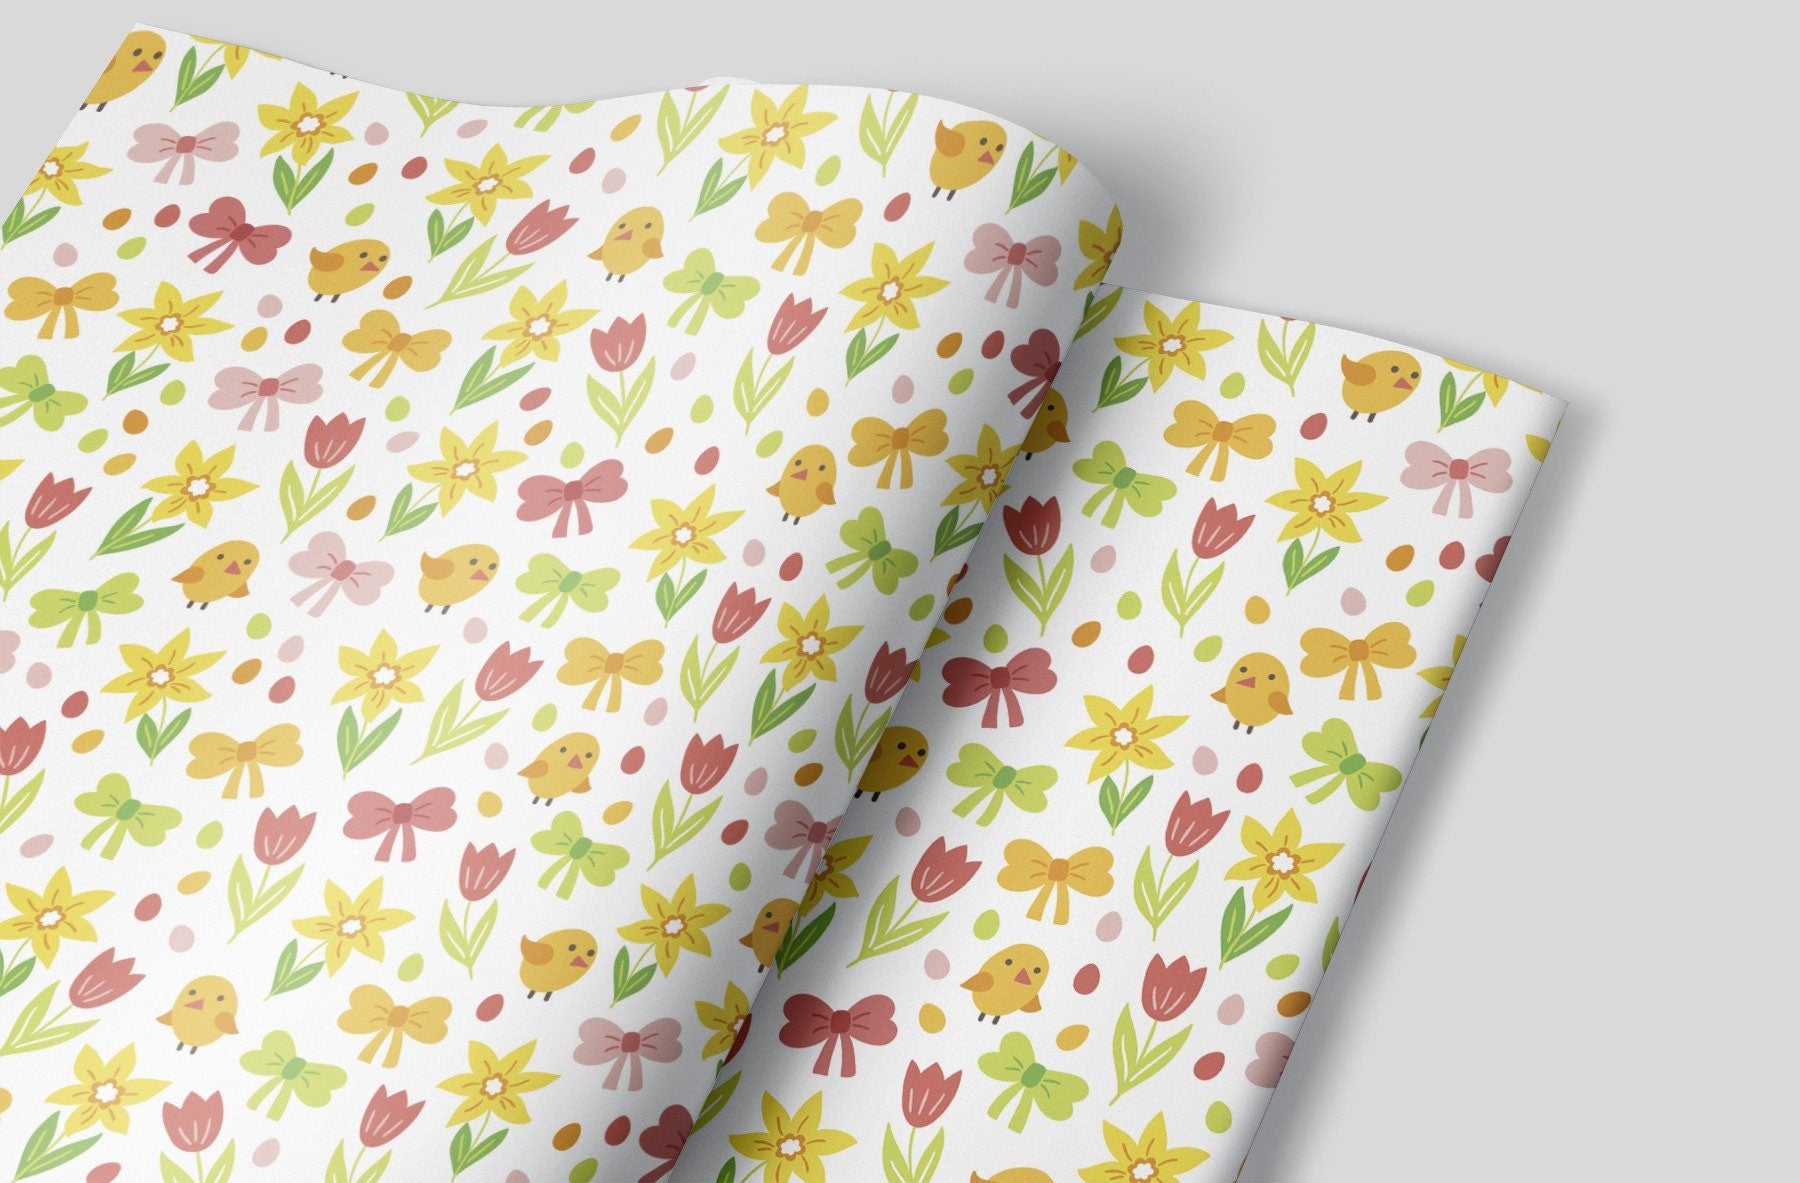 Baby Chicks in a cute Easter Scene on Wrapping paper